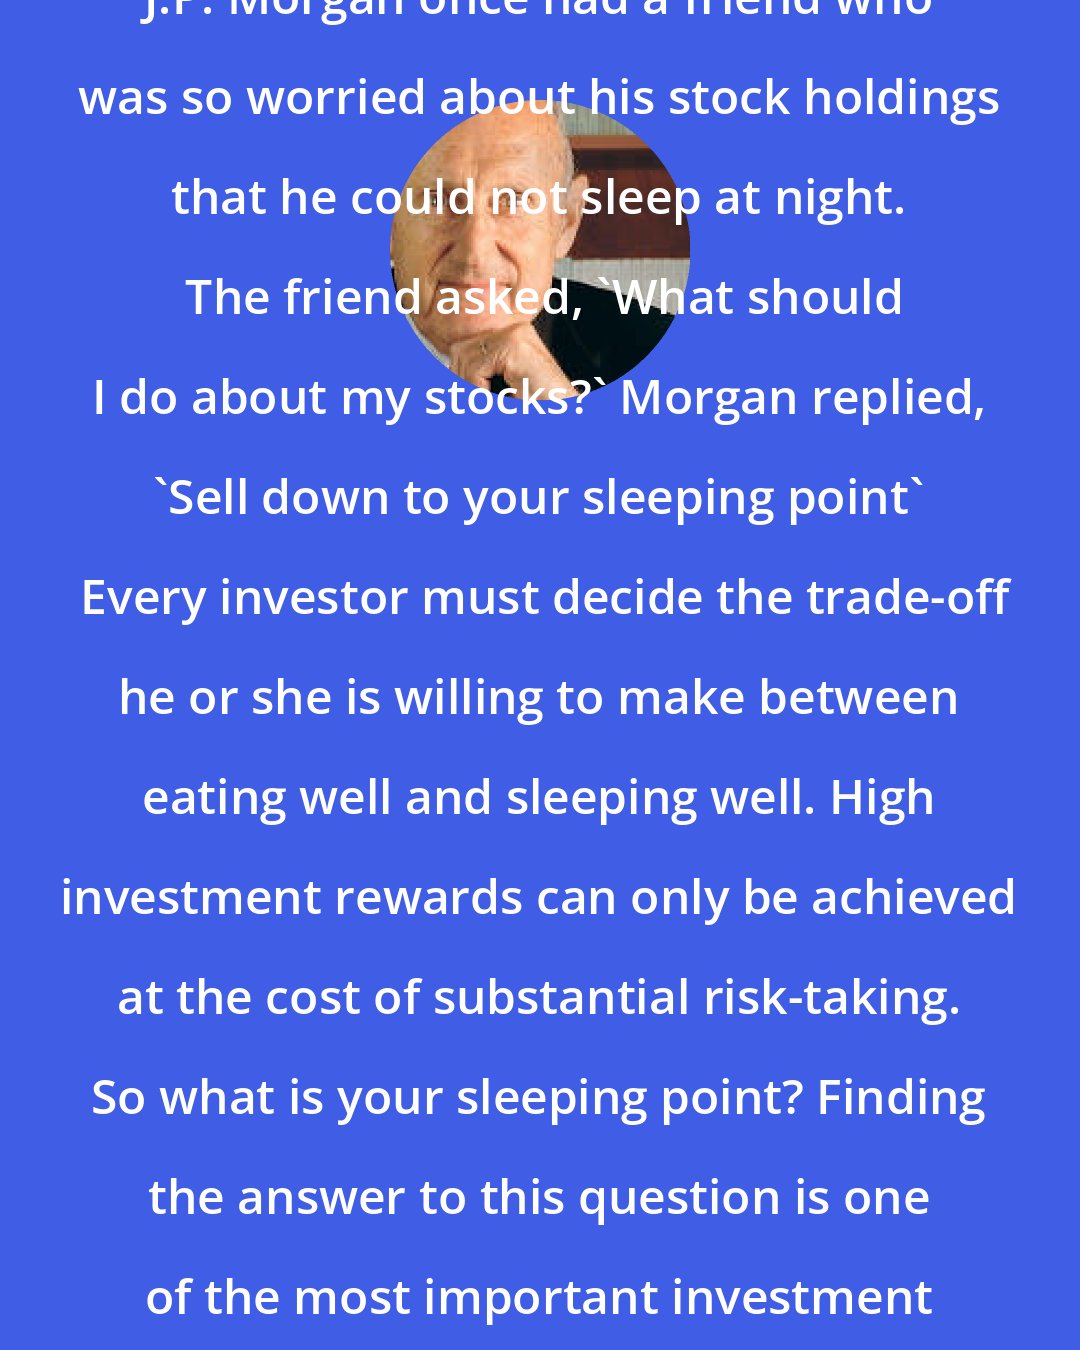 Burton Malkiel: J.P. Morgan once had a friend who was so worried about his stock holdings that he could not sleep at night.  The friend asked, 'What should I do about my stocks?' Morgan replied, 'Sell down to your sleeping point'  Every investor must decide the trade-off he or she is willing to make between eating well and sleeping well. High investment rewards can only be achieved at the cost of substantial risk-taking. So what is your sleeping point? Finding the answer to this question is one of the most important investment steps you must take.